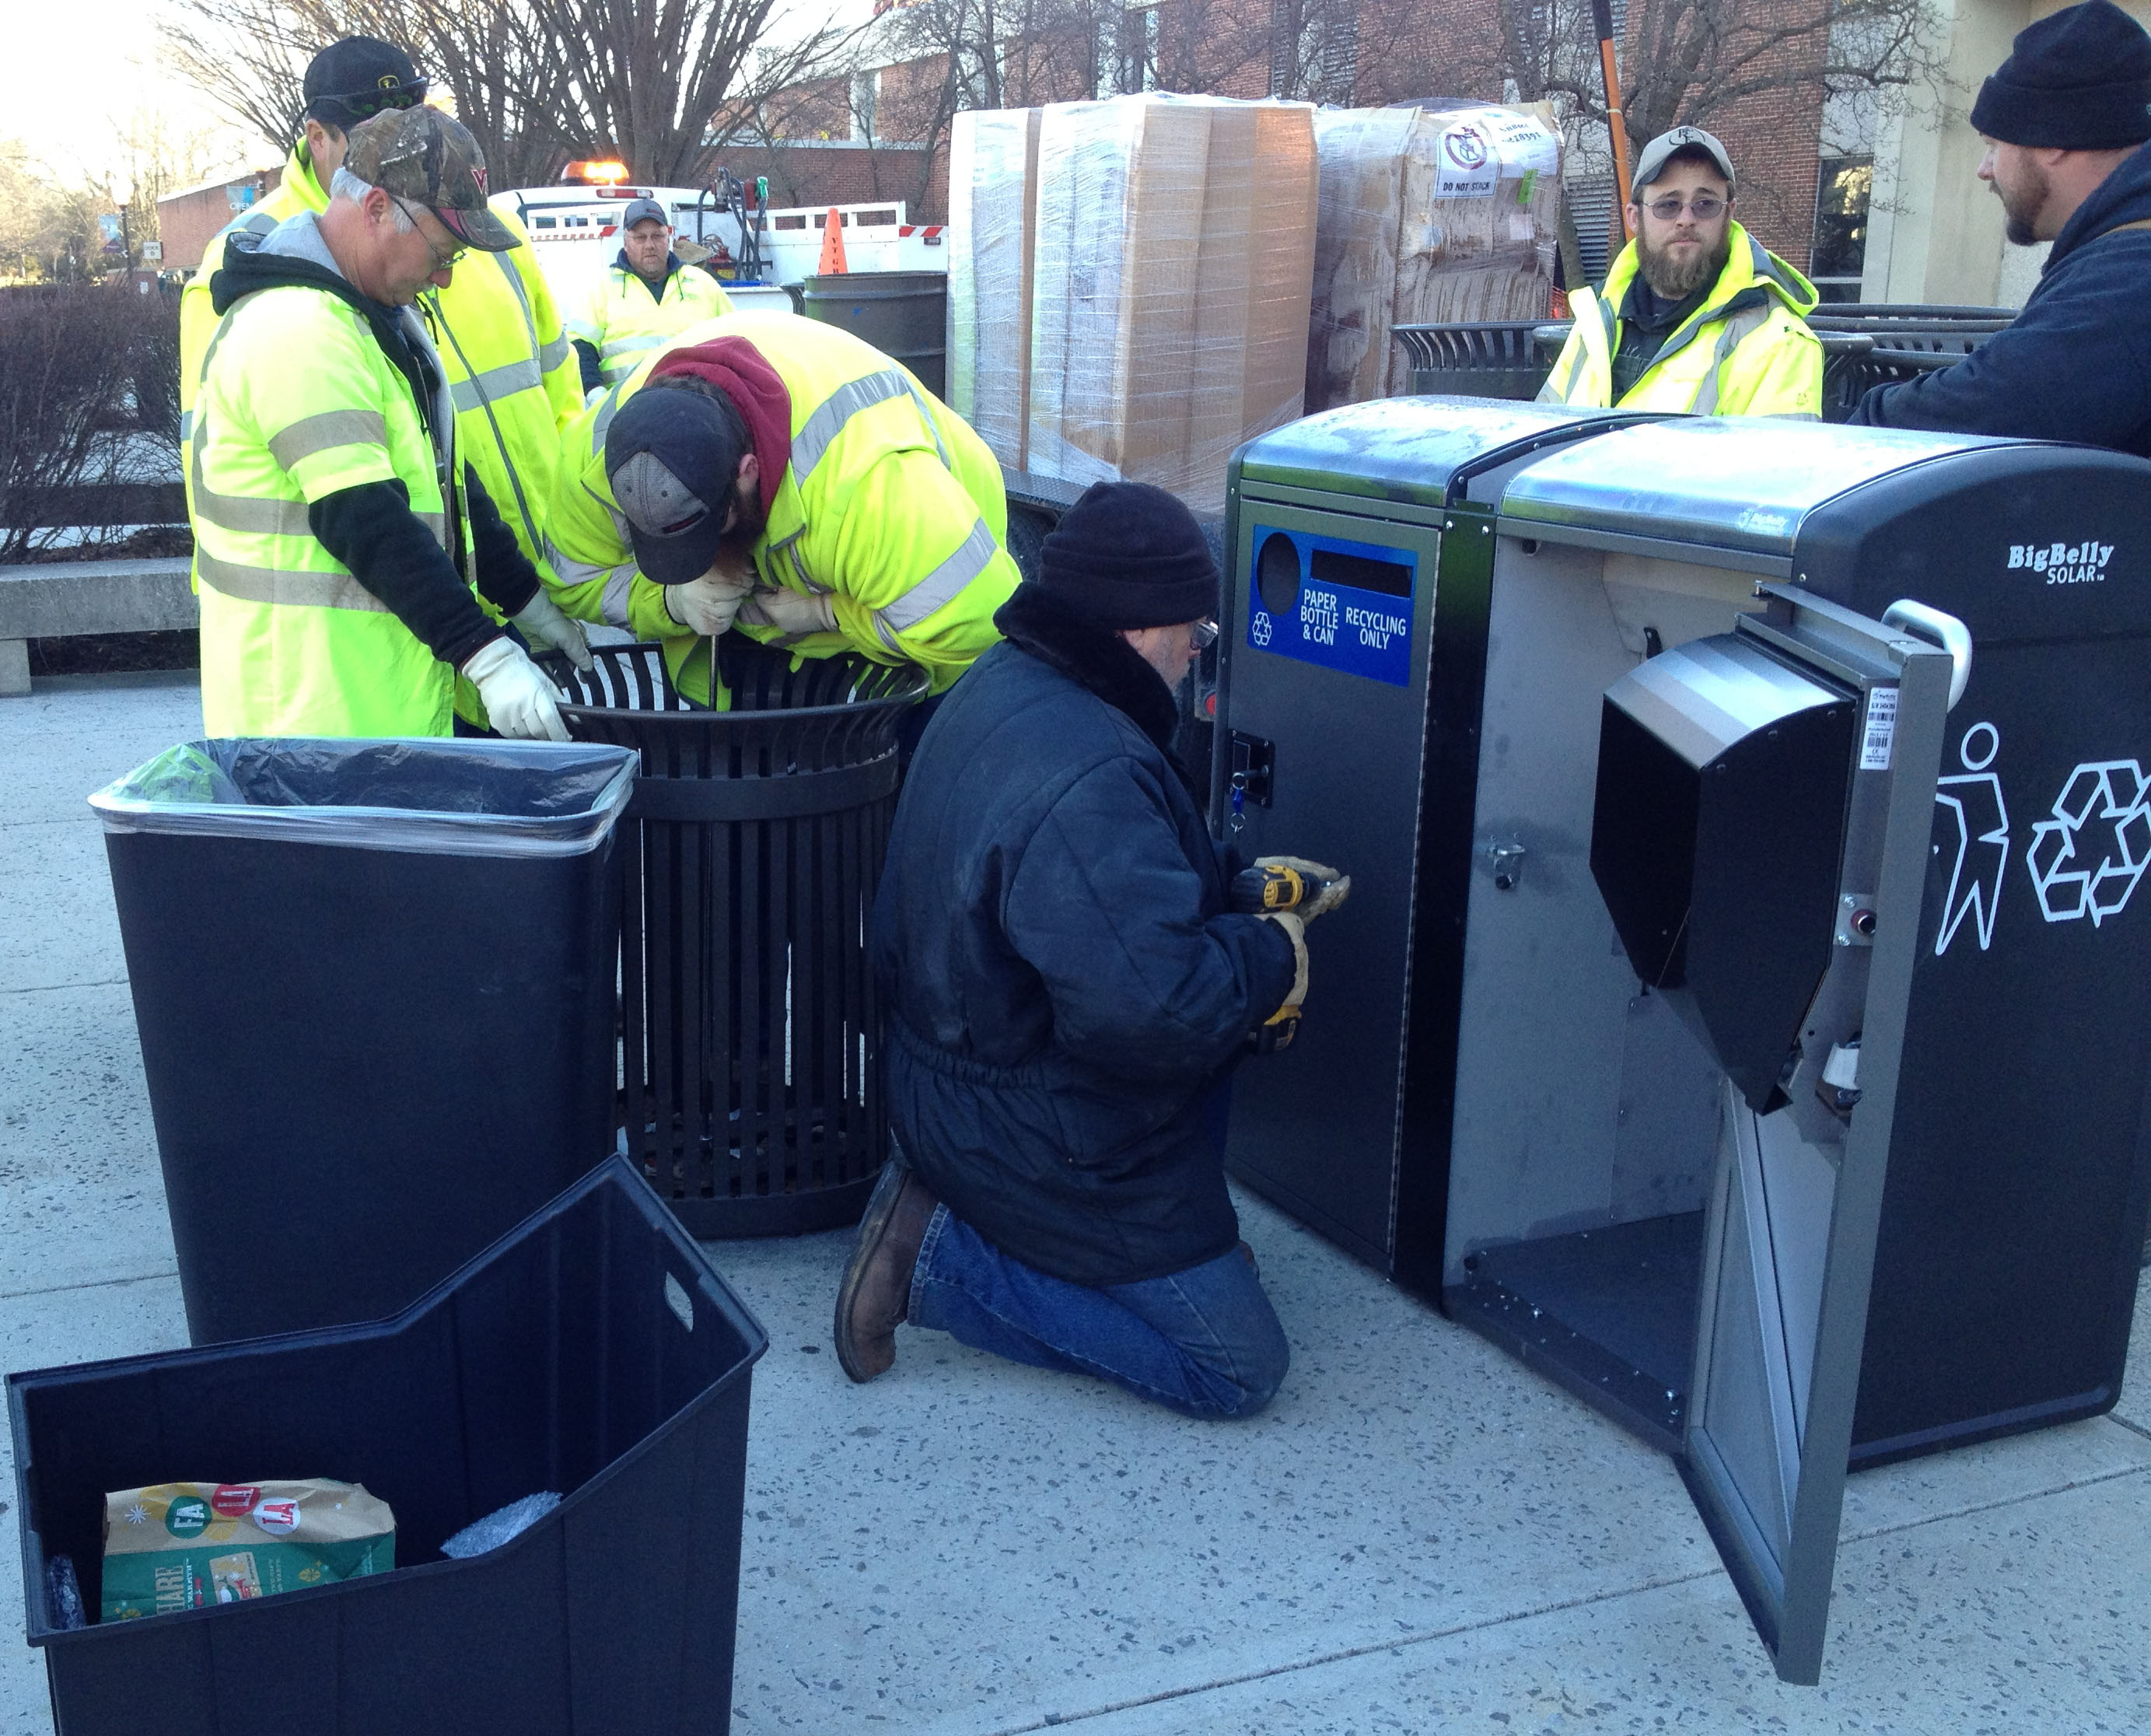 crews installing new big belly trash and recycling containers